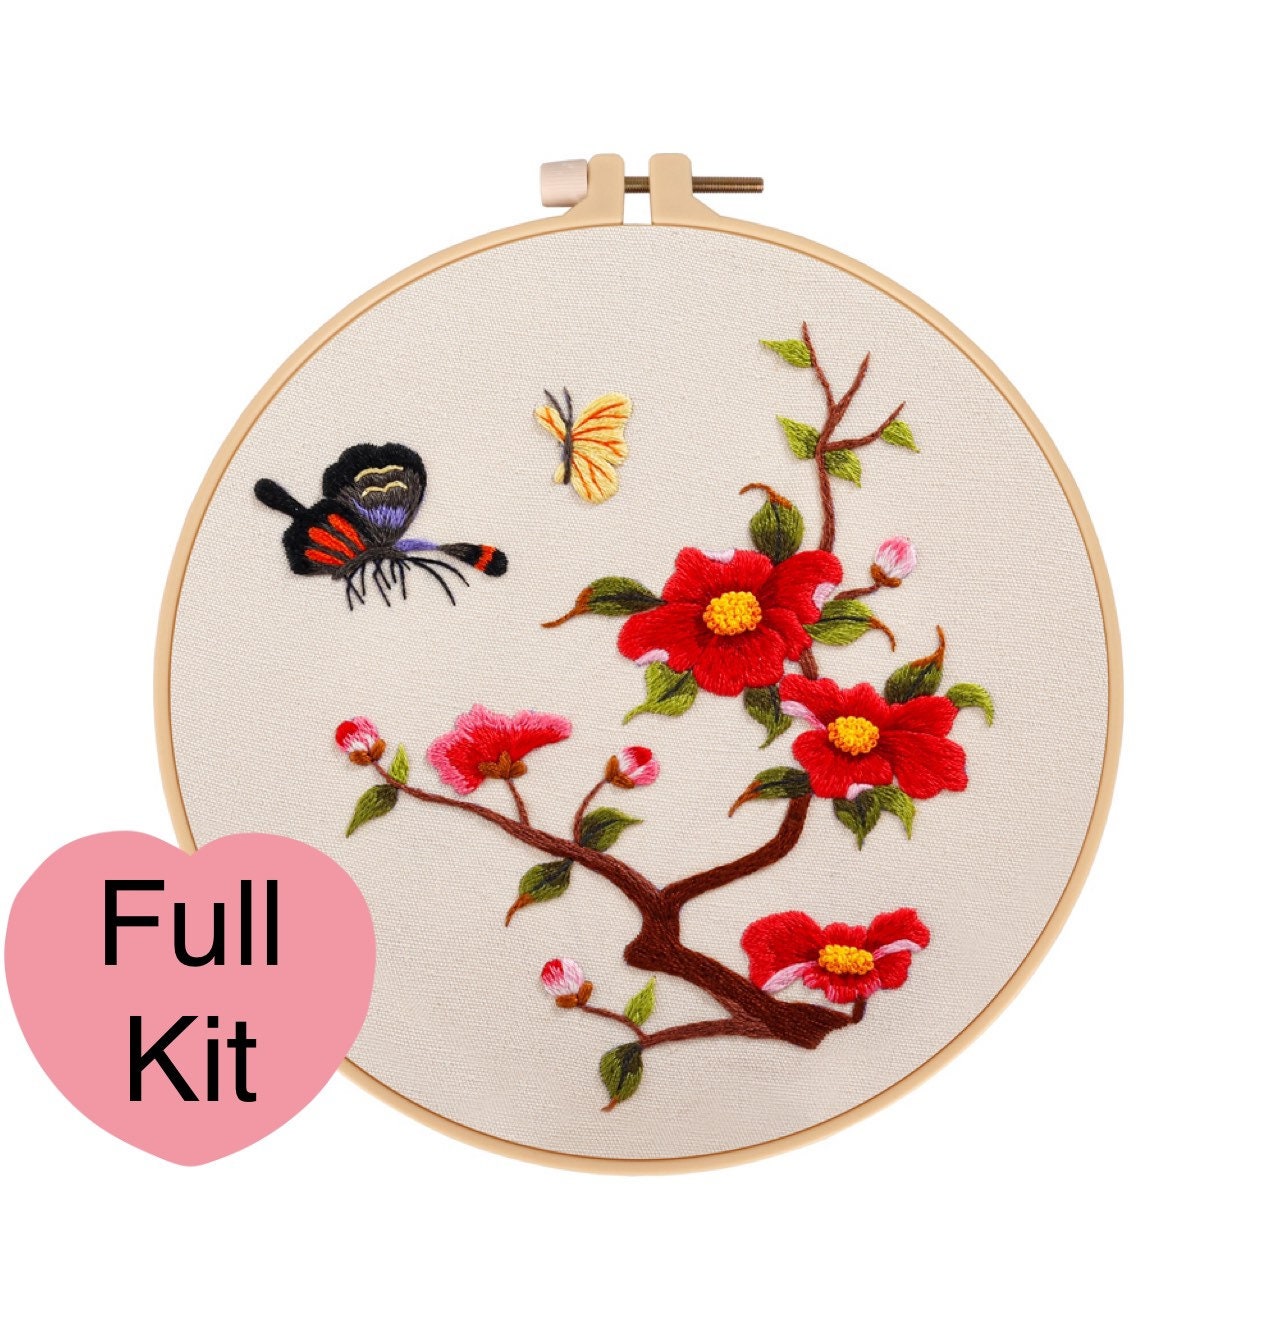 Floral Embroidery Kit for Beginners Embroidery Pattern Peach Blossom  Trumpet Vine Magnolia Camellia Vintage Needlepoint Craft Kit for Adults 